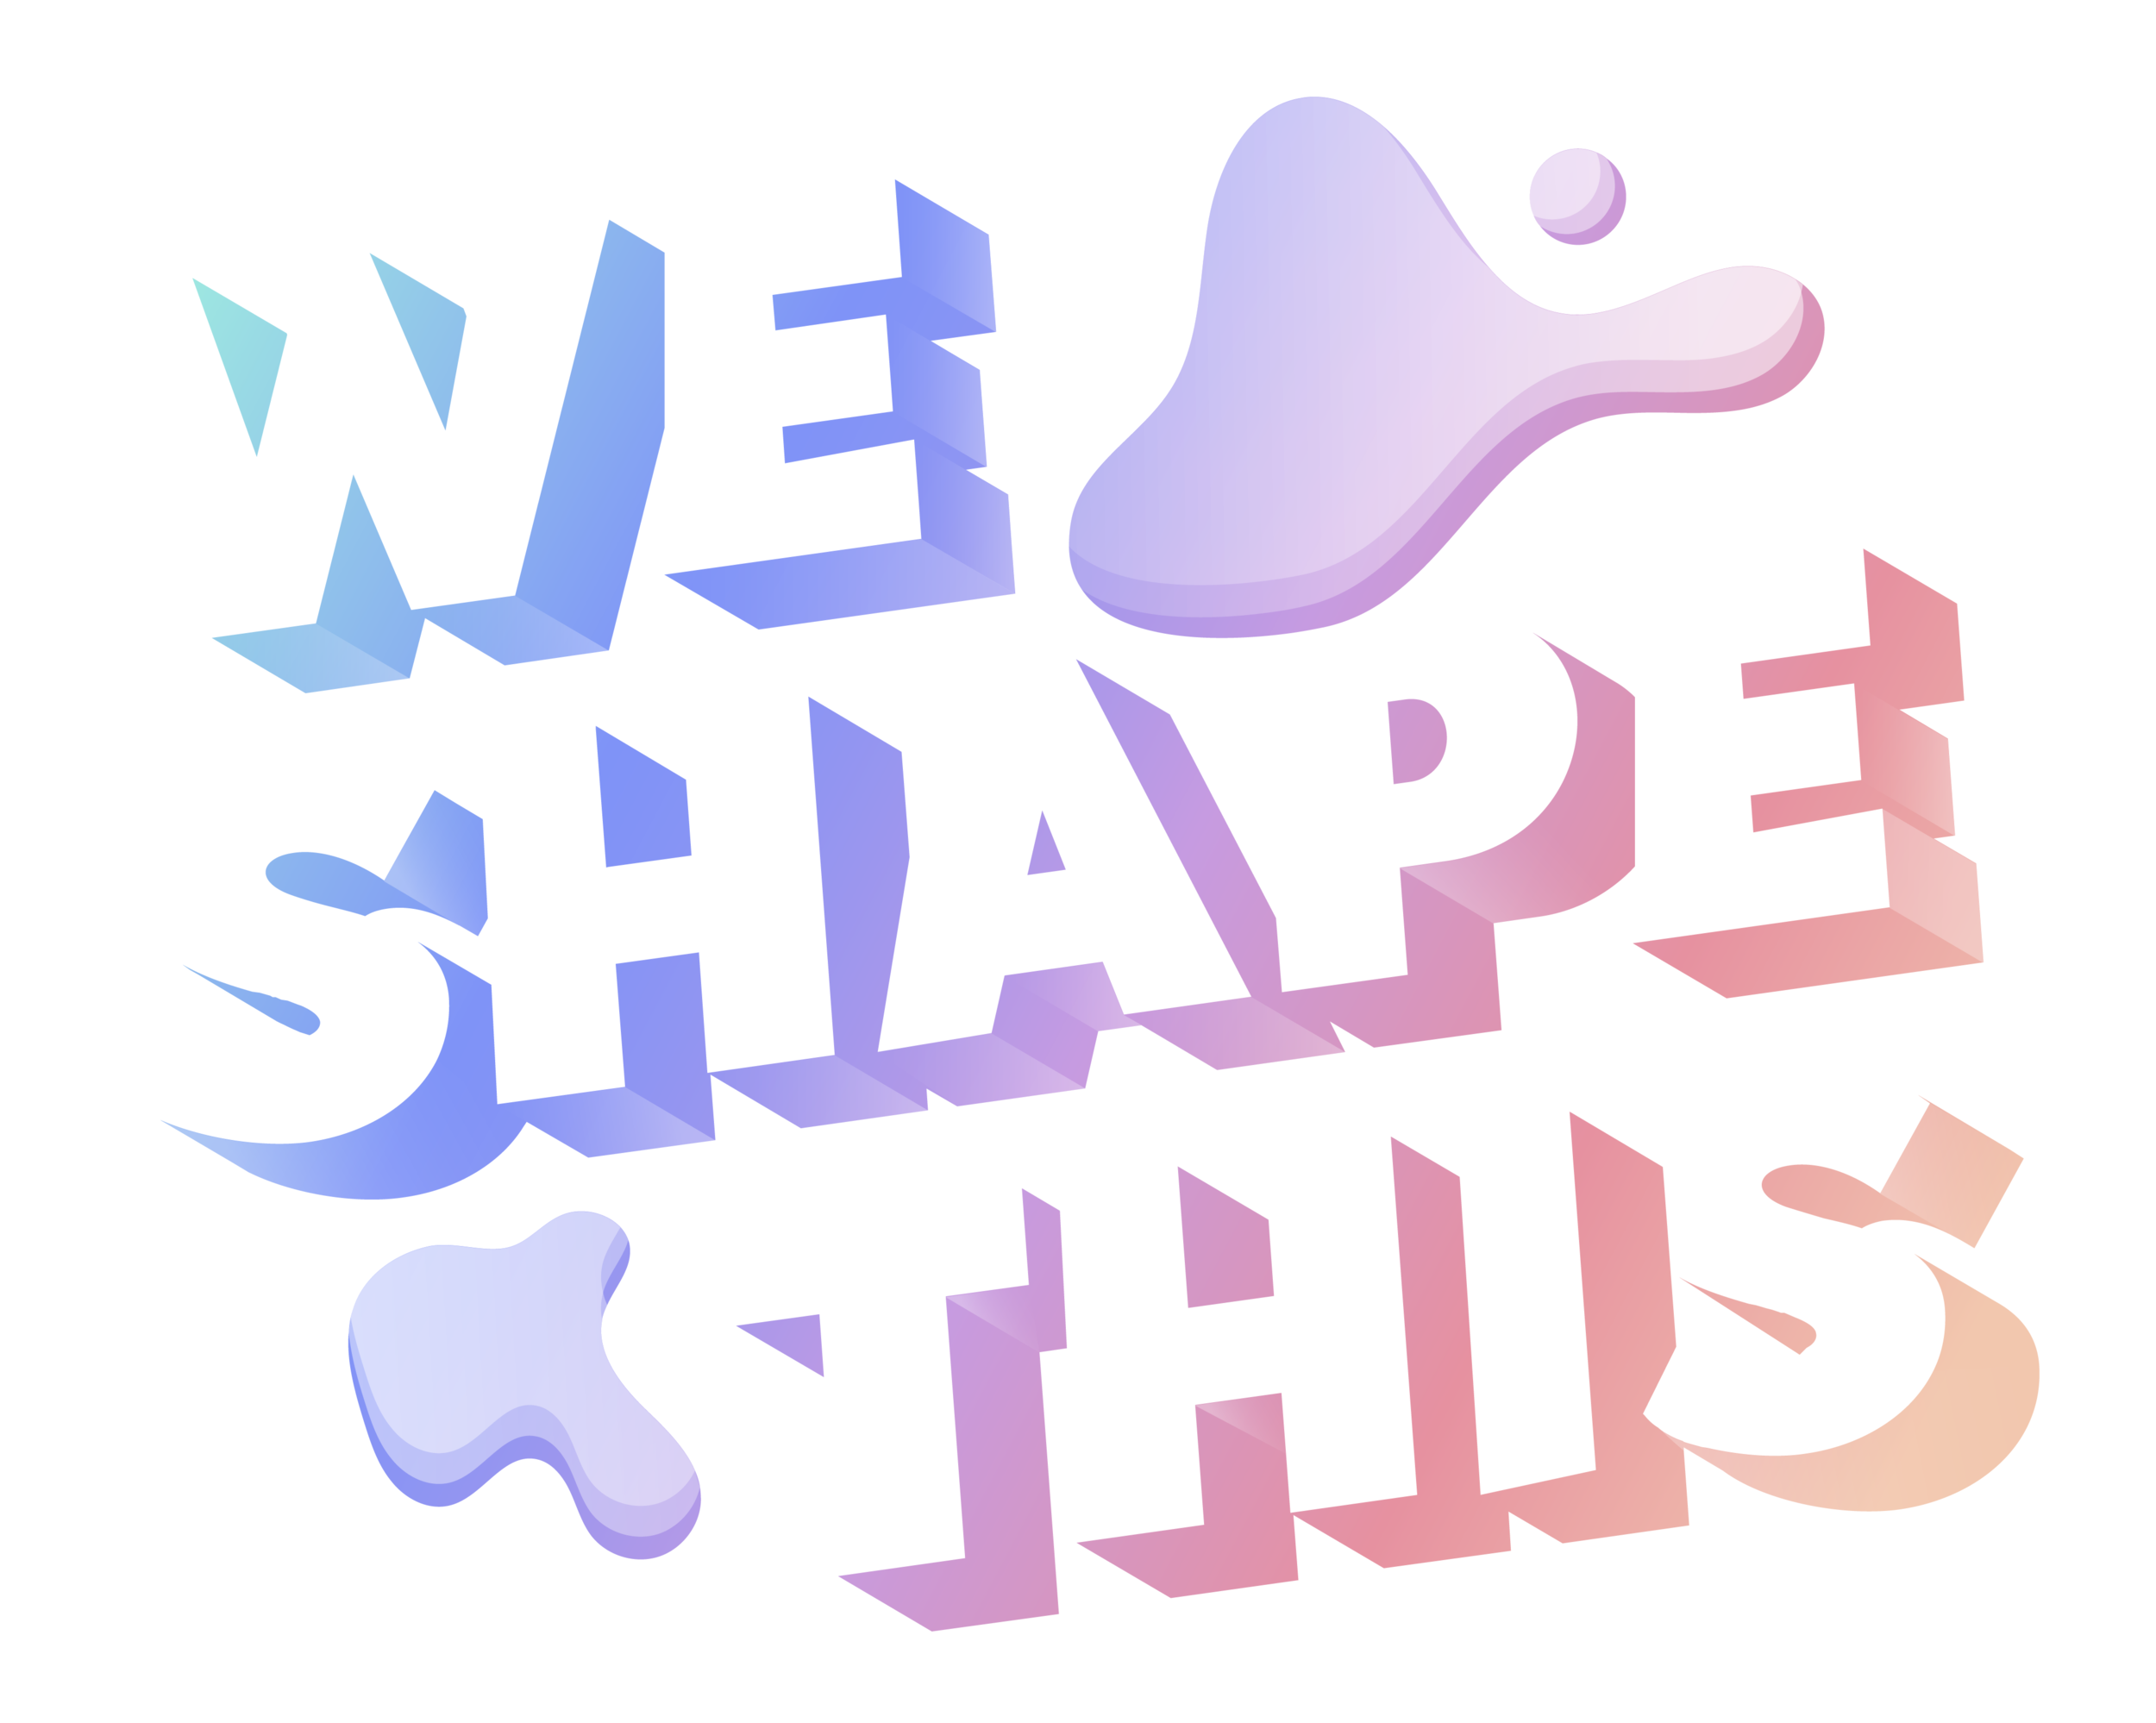 We Shape This